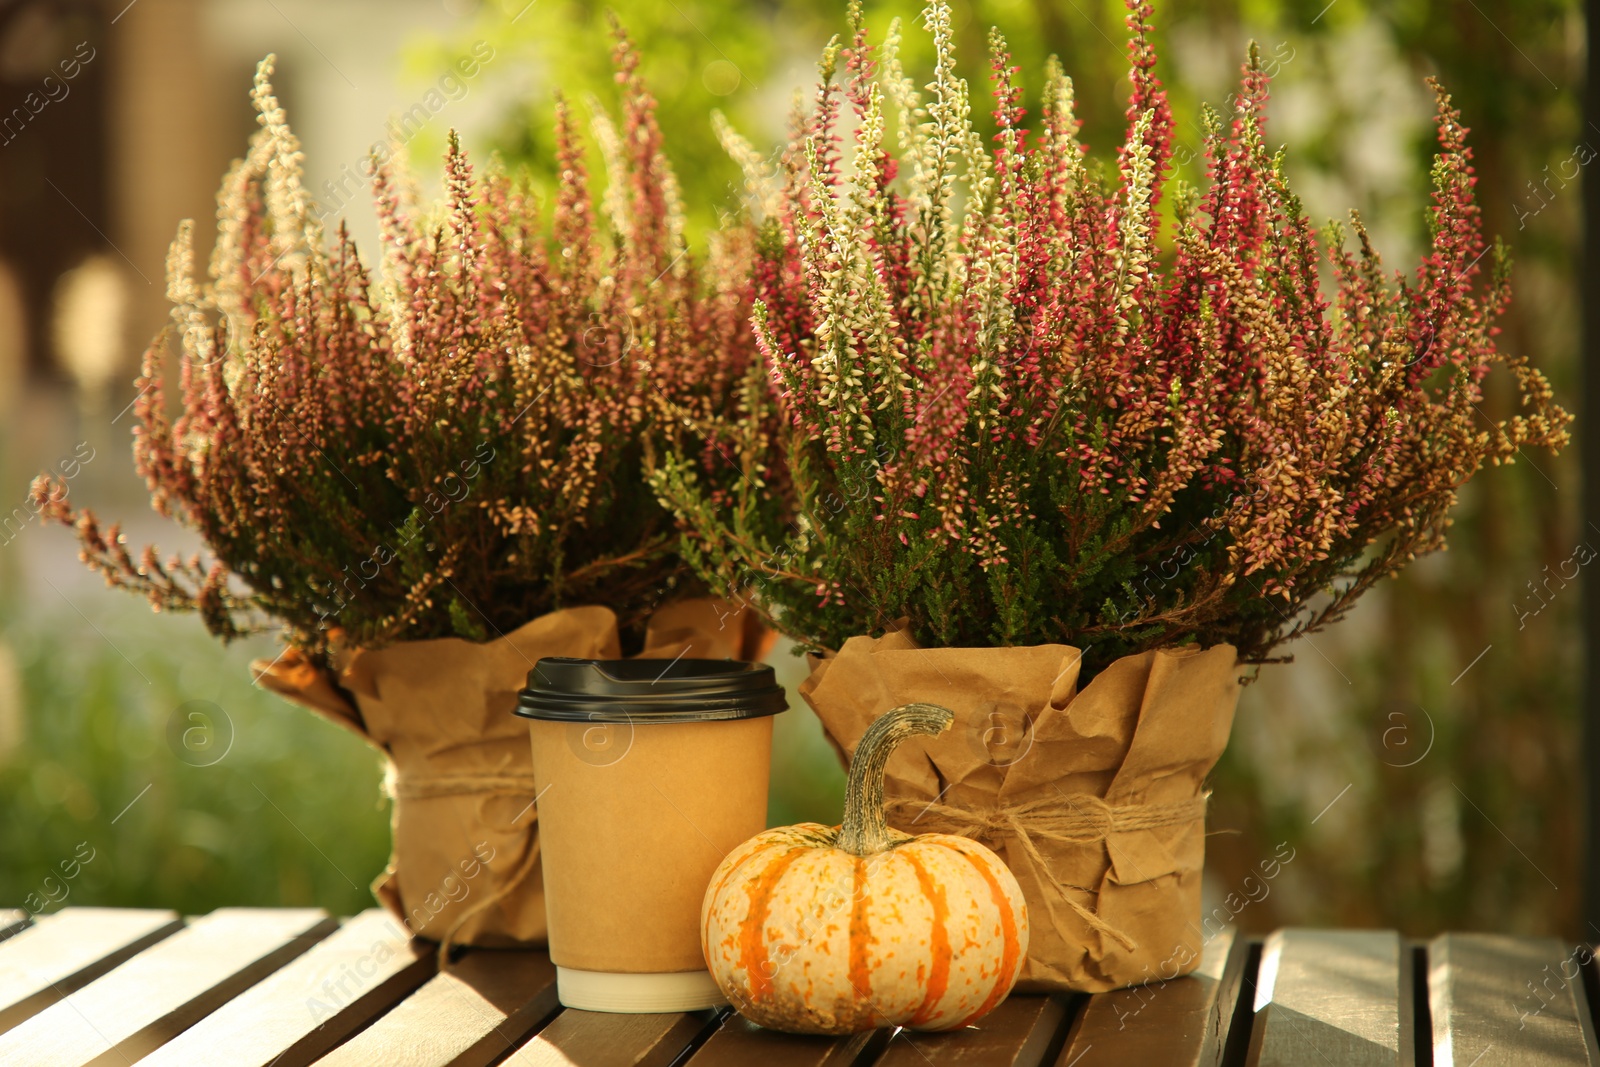 Photo of Beautiful heather flowers in pots, paper cup of drink and pumpkin on wooden surface outdoors